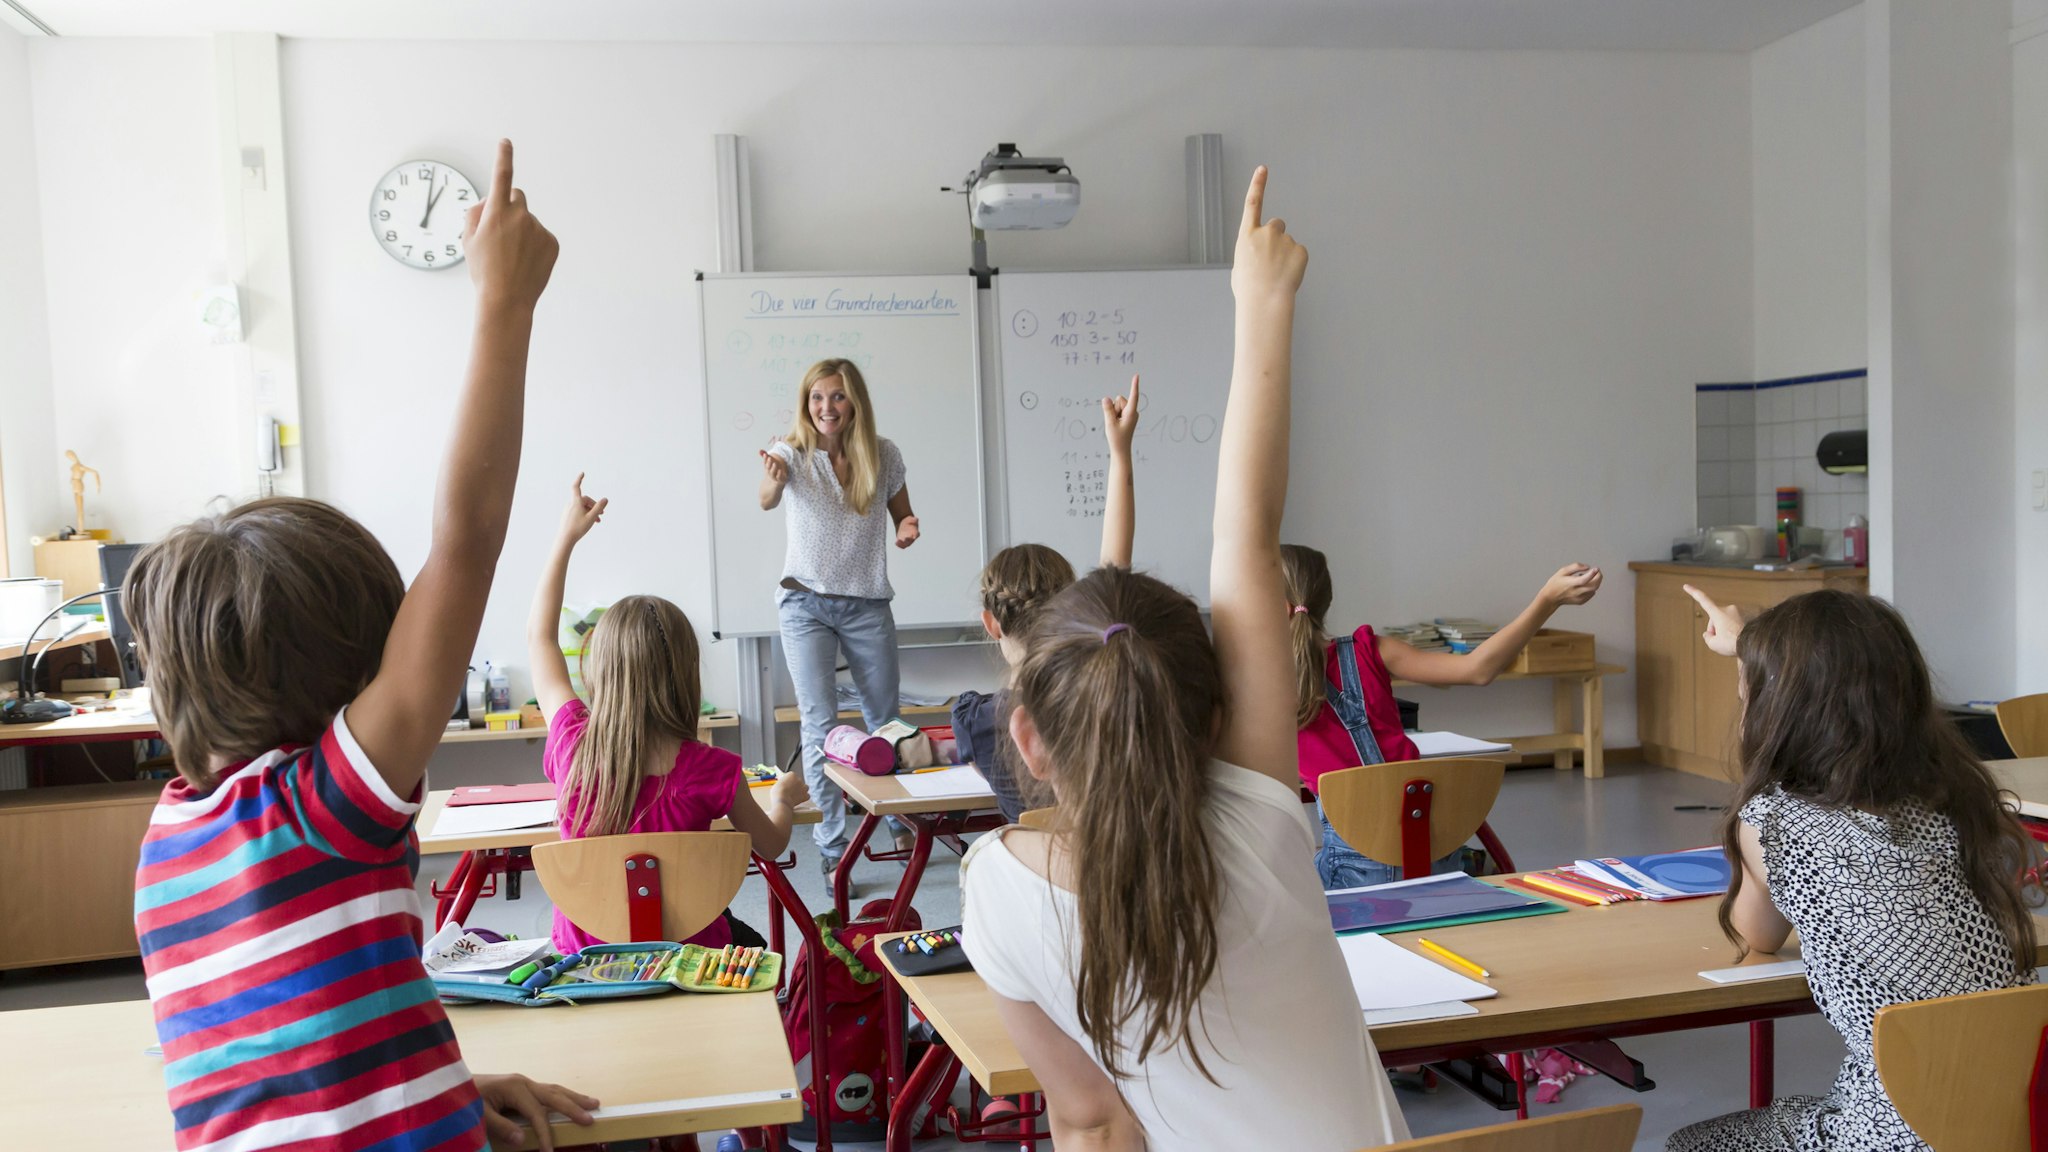 Active pupils raising their hands in class - stock photo